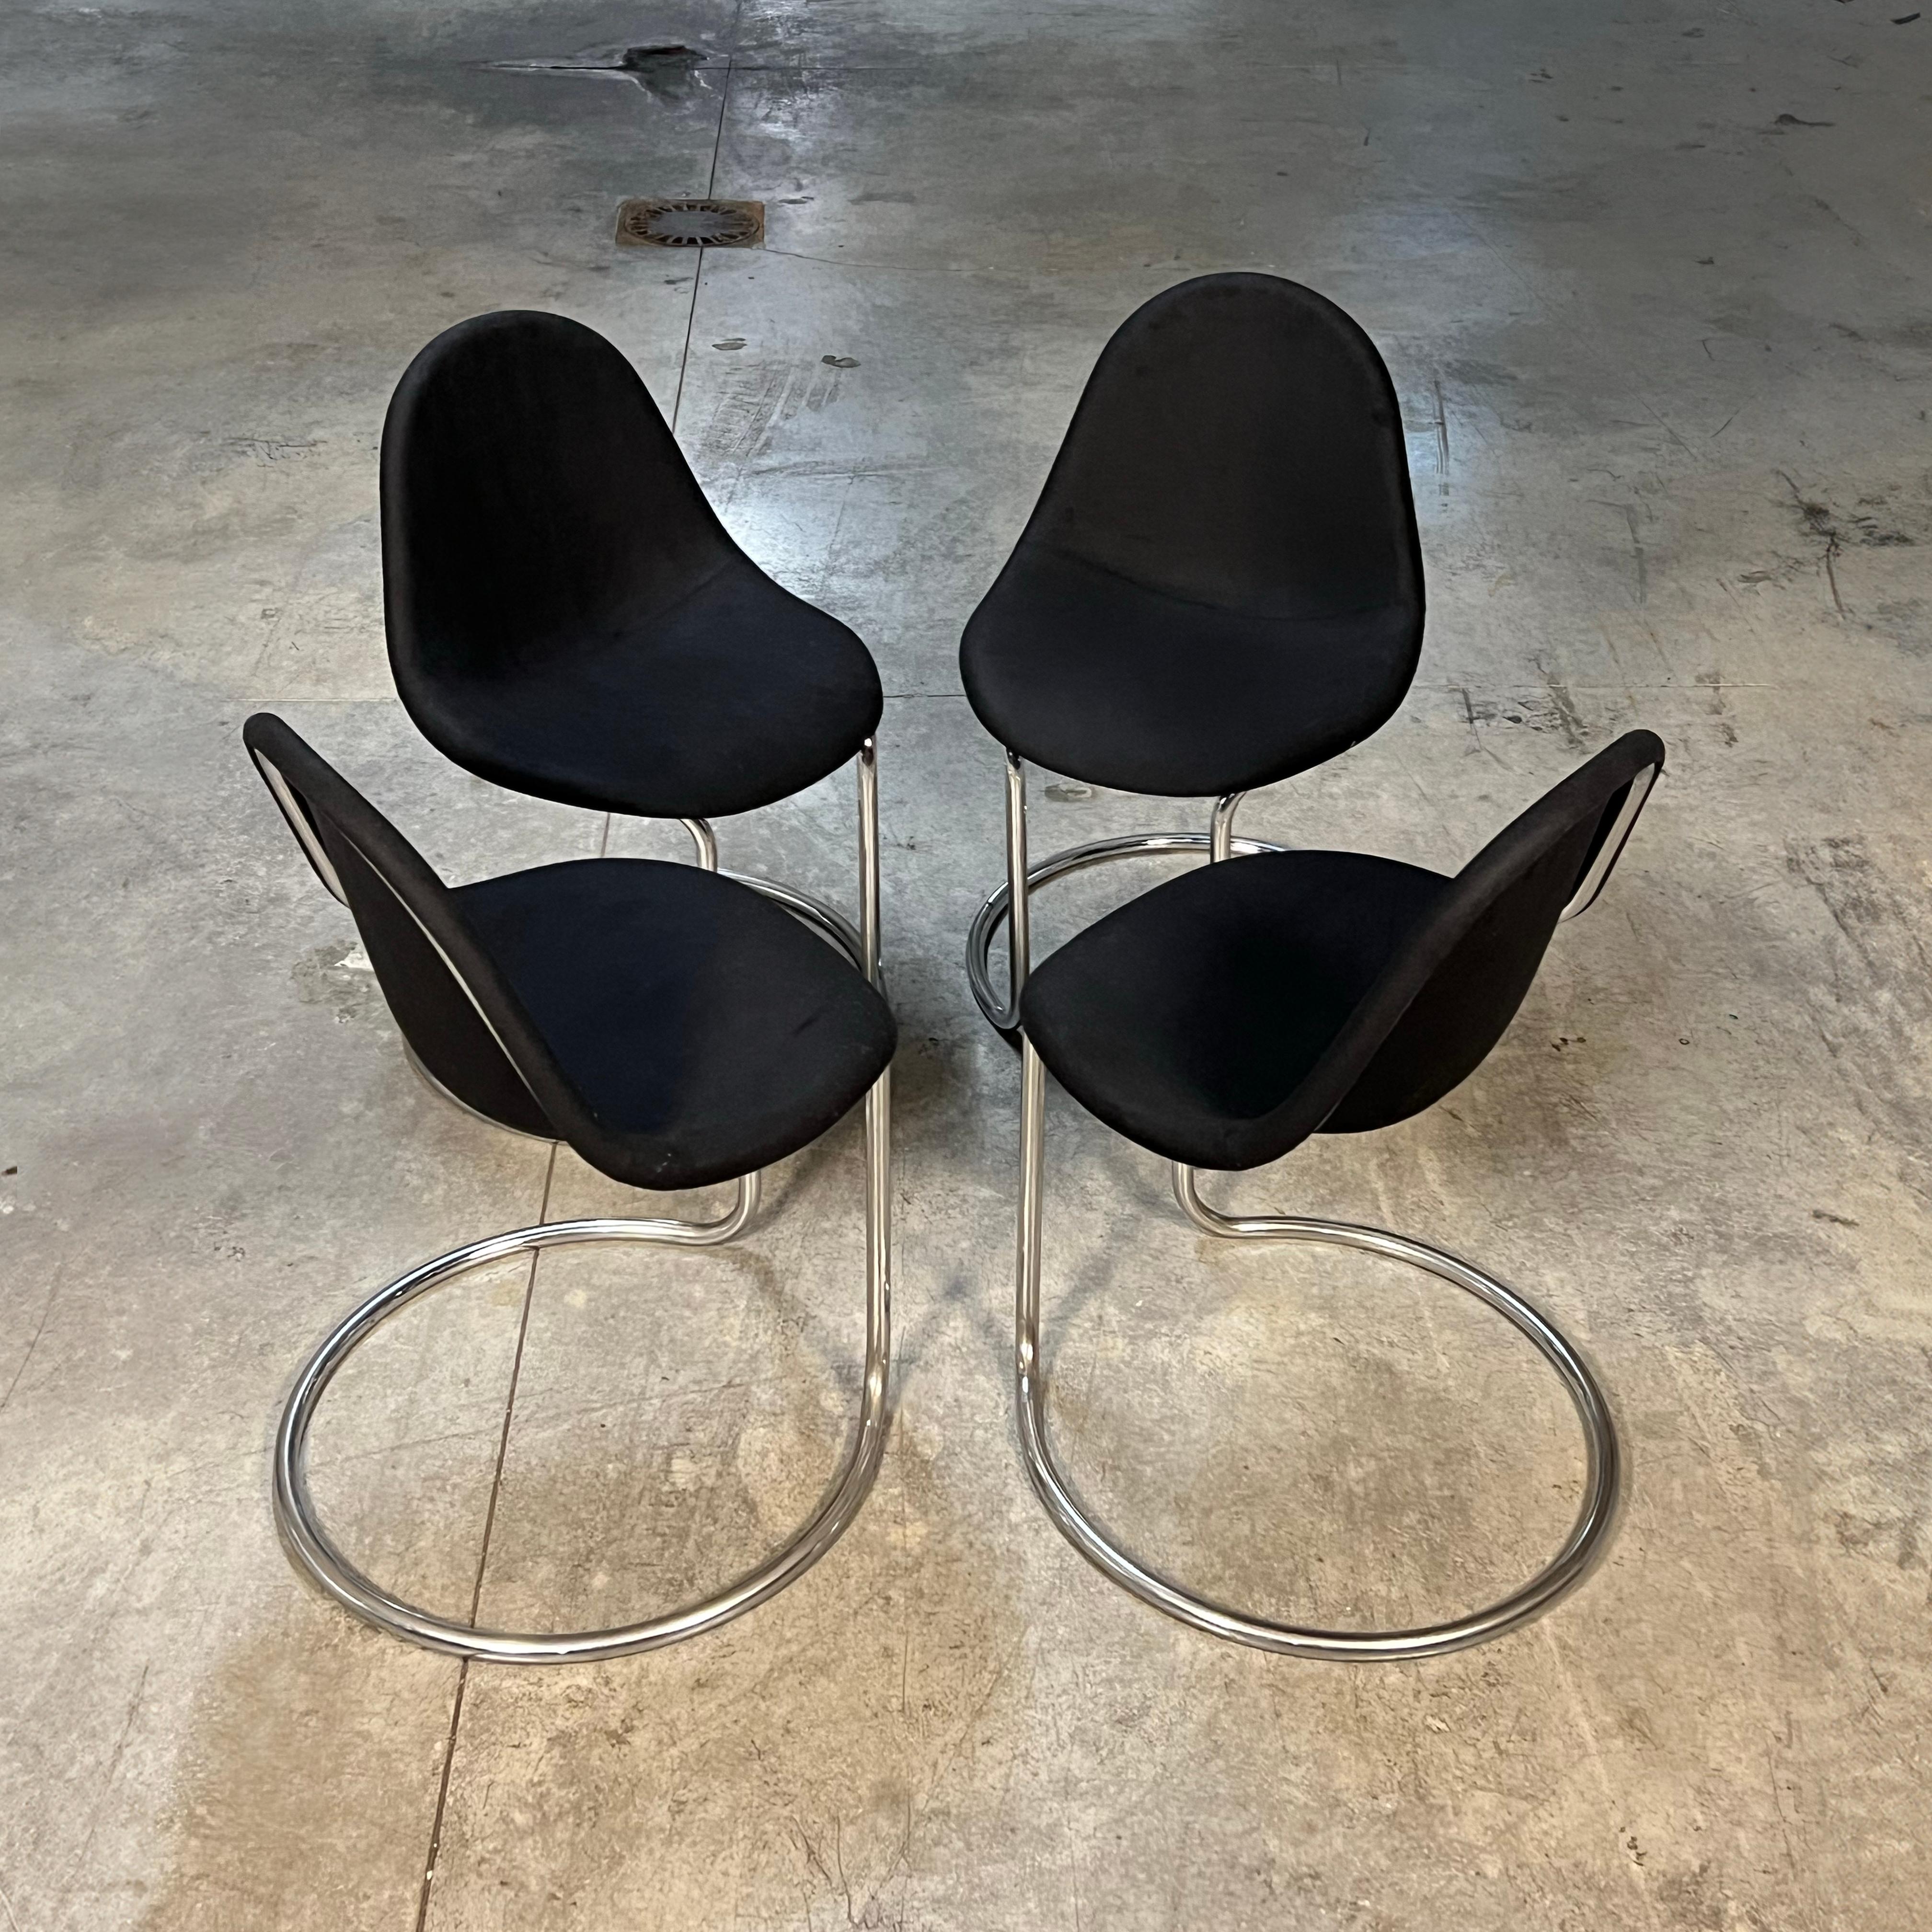 A collection of four Maya chairs crafted by Giotto Stoppino for Bernini during the 1970s, these chairs have undergone recent reupholstering with a luscious, dense black fabric.

The organic form of the chair's shell is affixed to a cantilevered